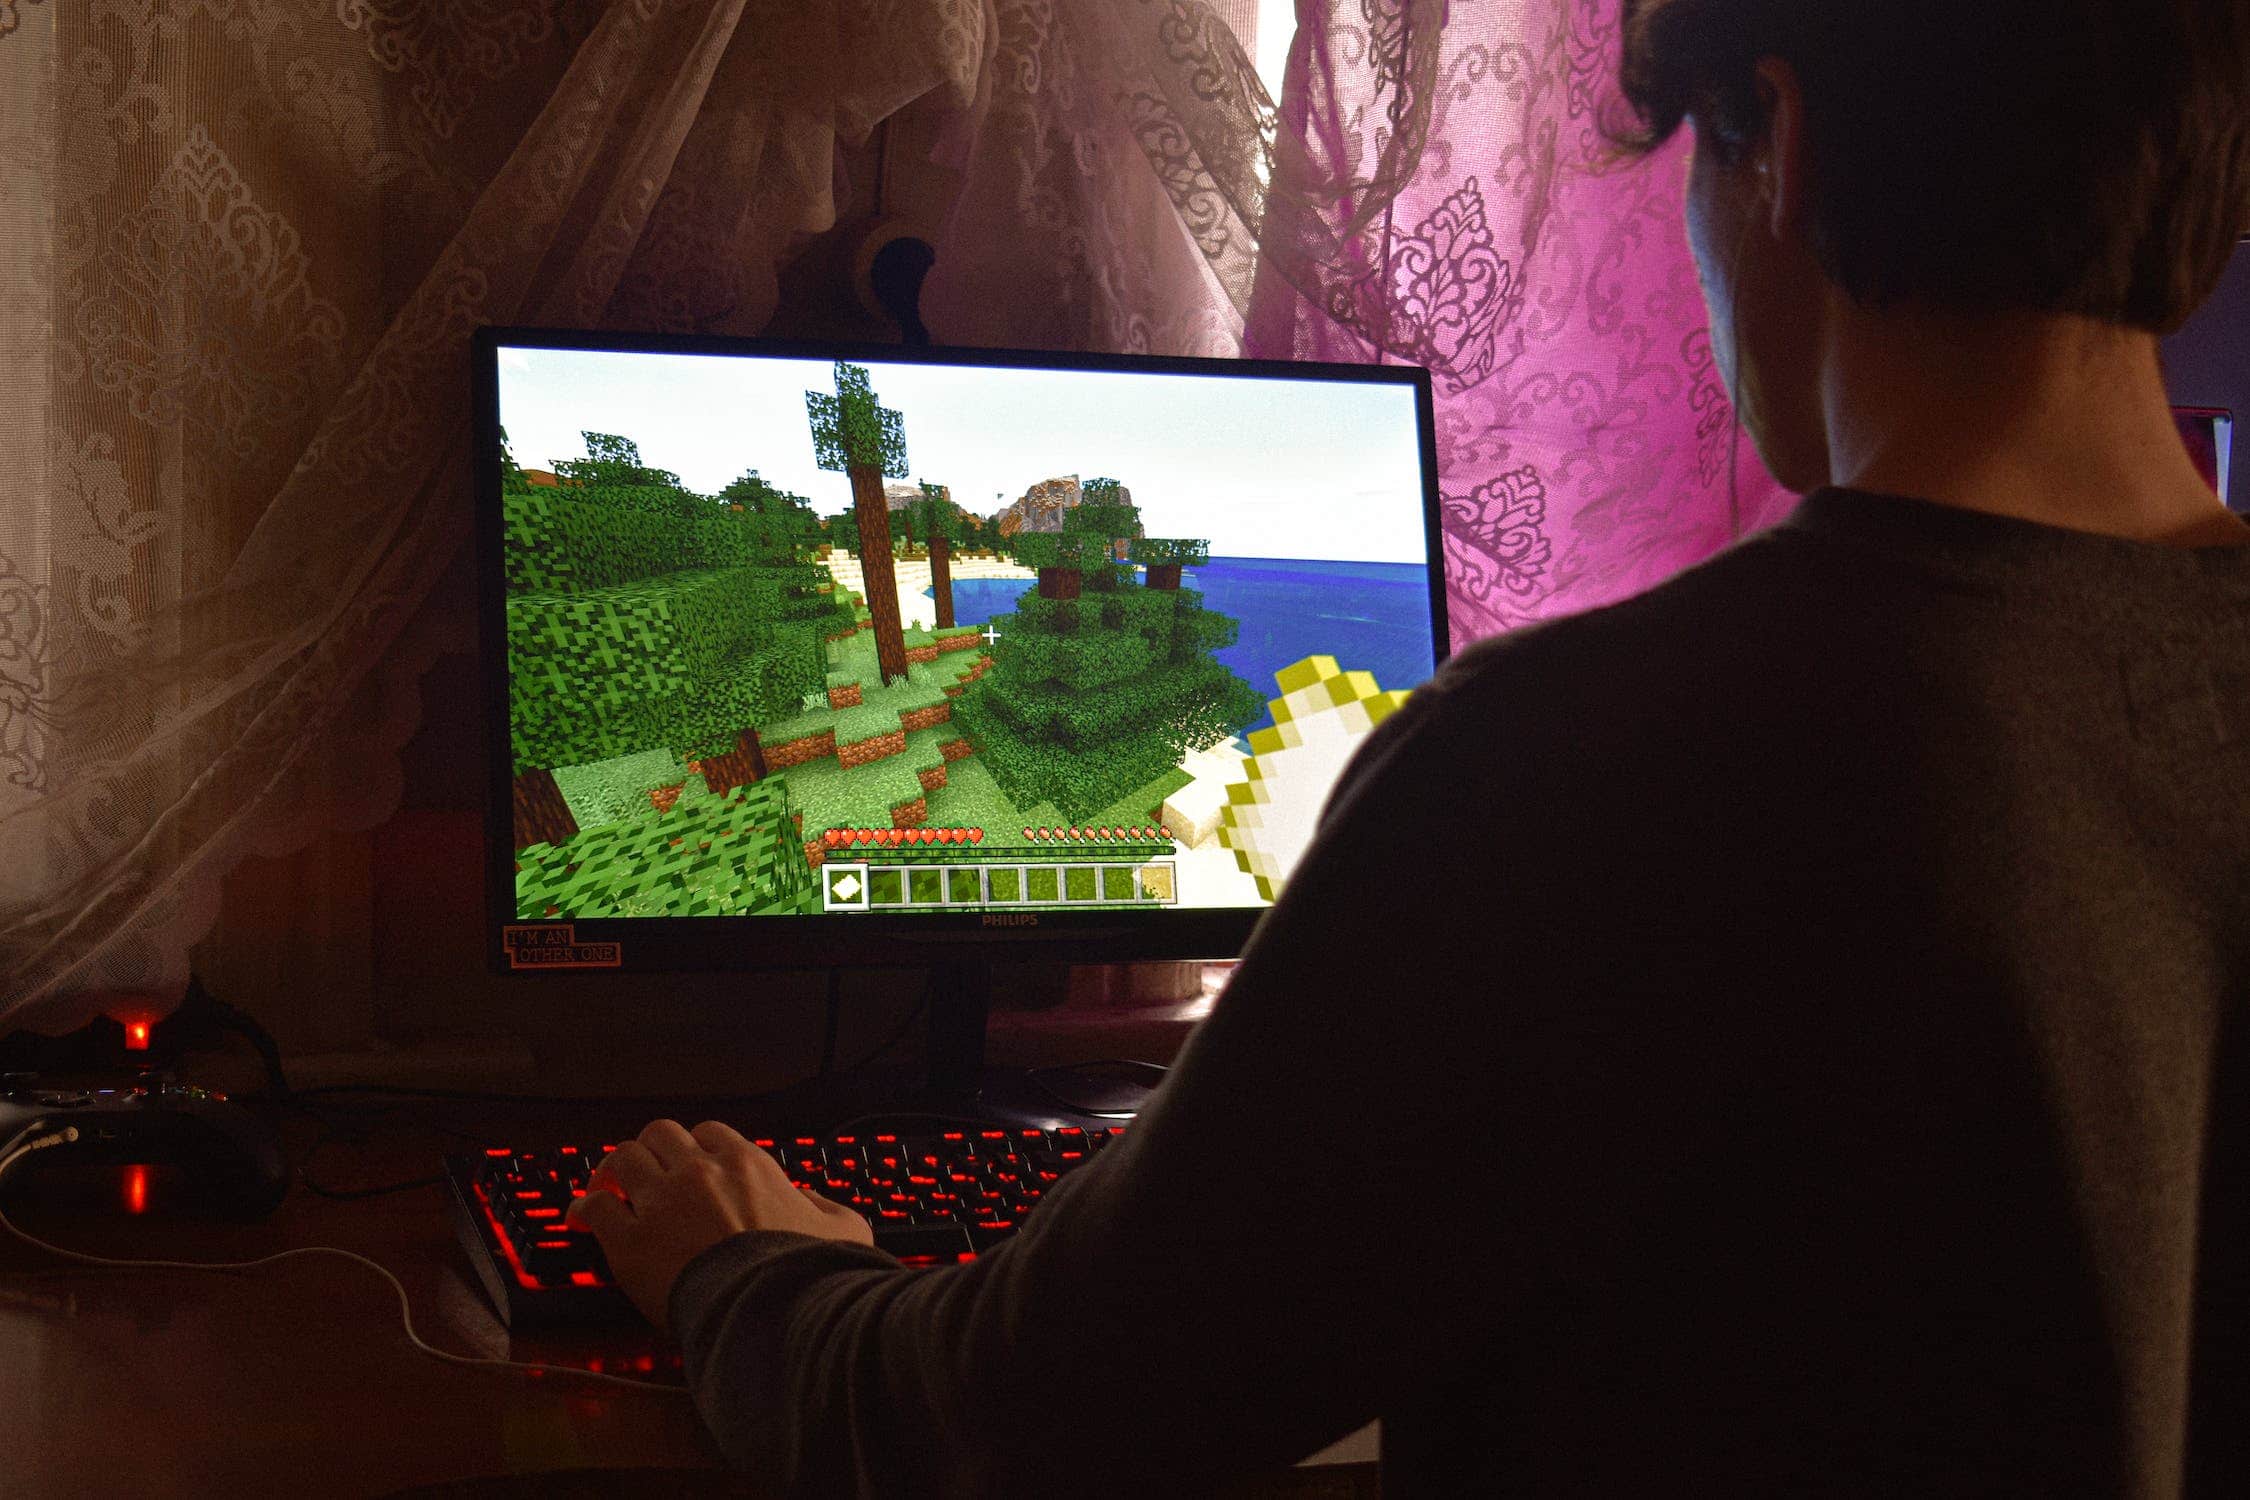 Unschooling with Minecraft: How to educate your kids without resorting to the traditional schooling method